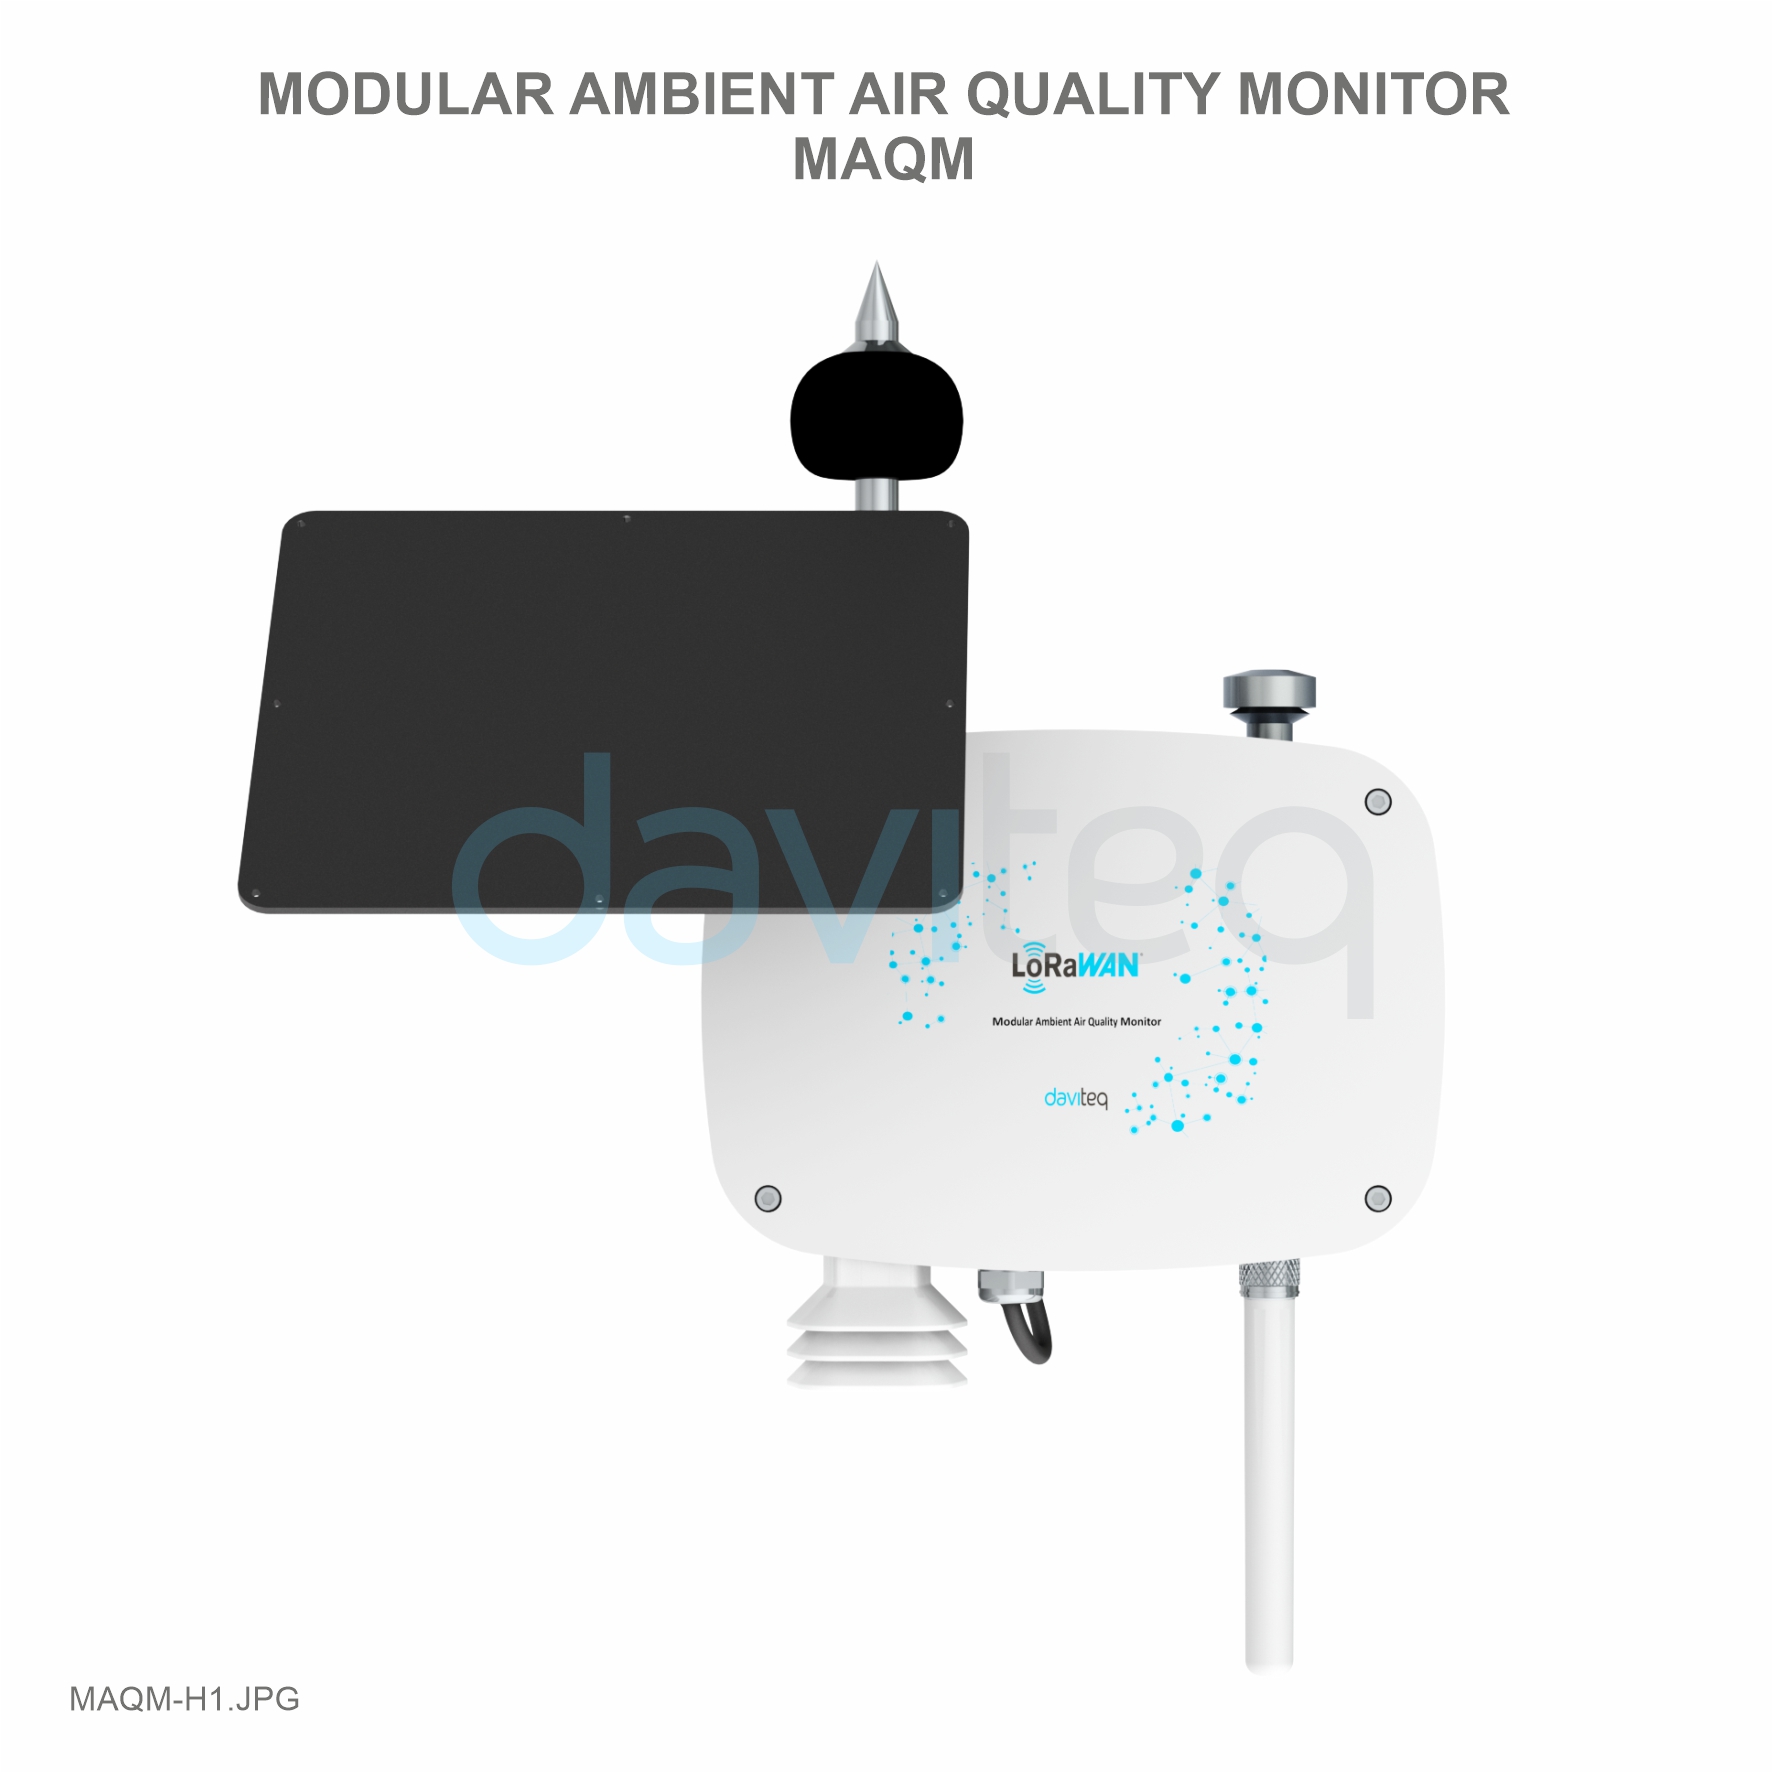 Modular Ambient Air Quality Monitor